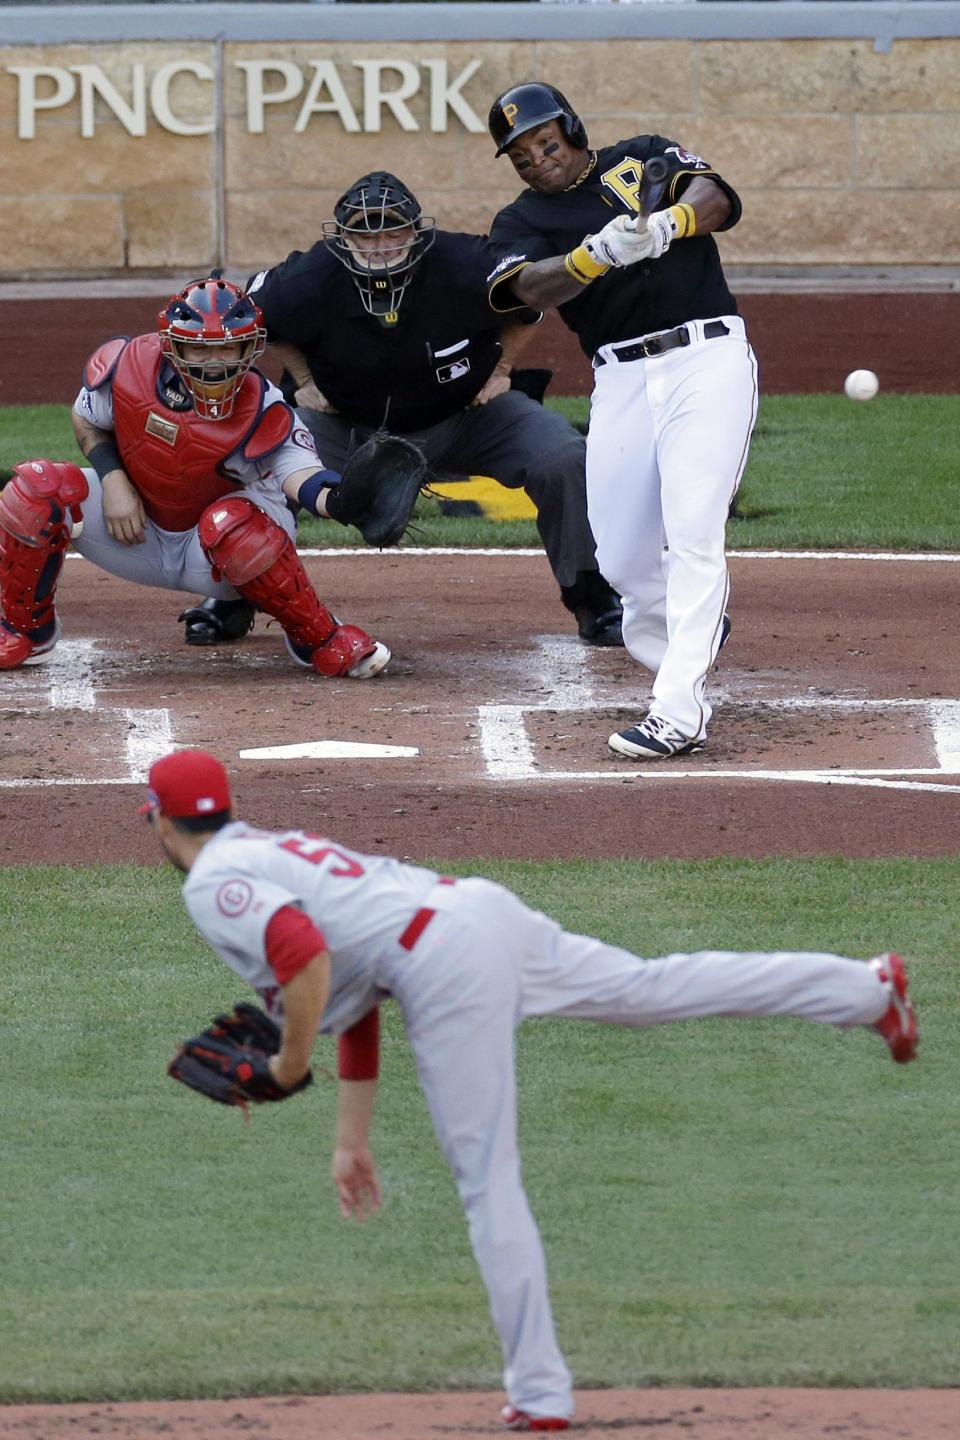 Pirates slip by Cards & L.A. defeats Atlanta to lead NLDS, 2-1 201310061654608662299